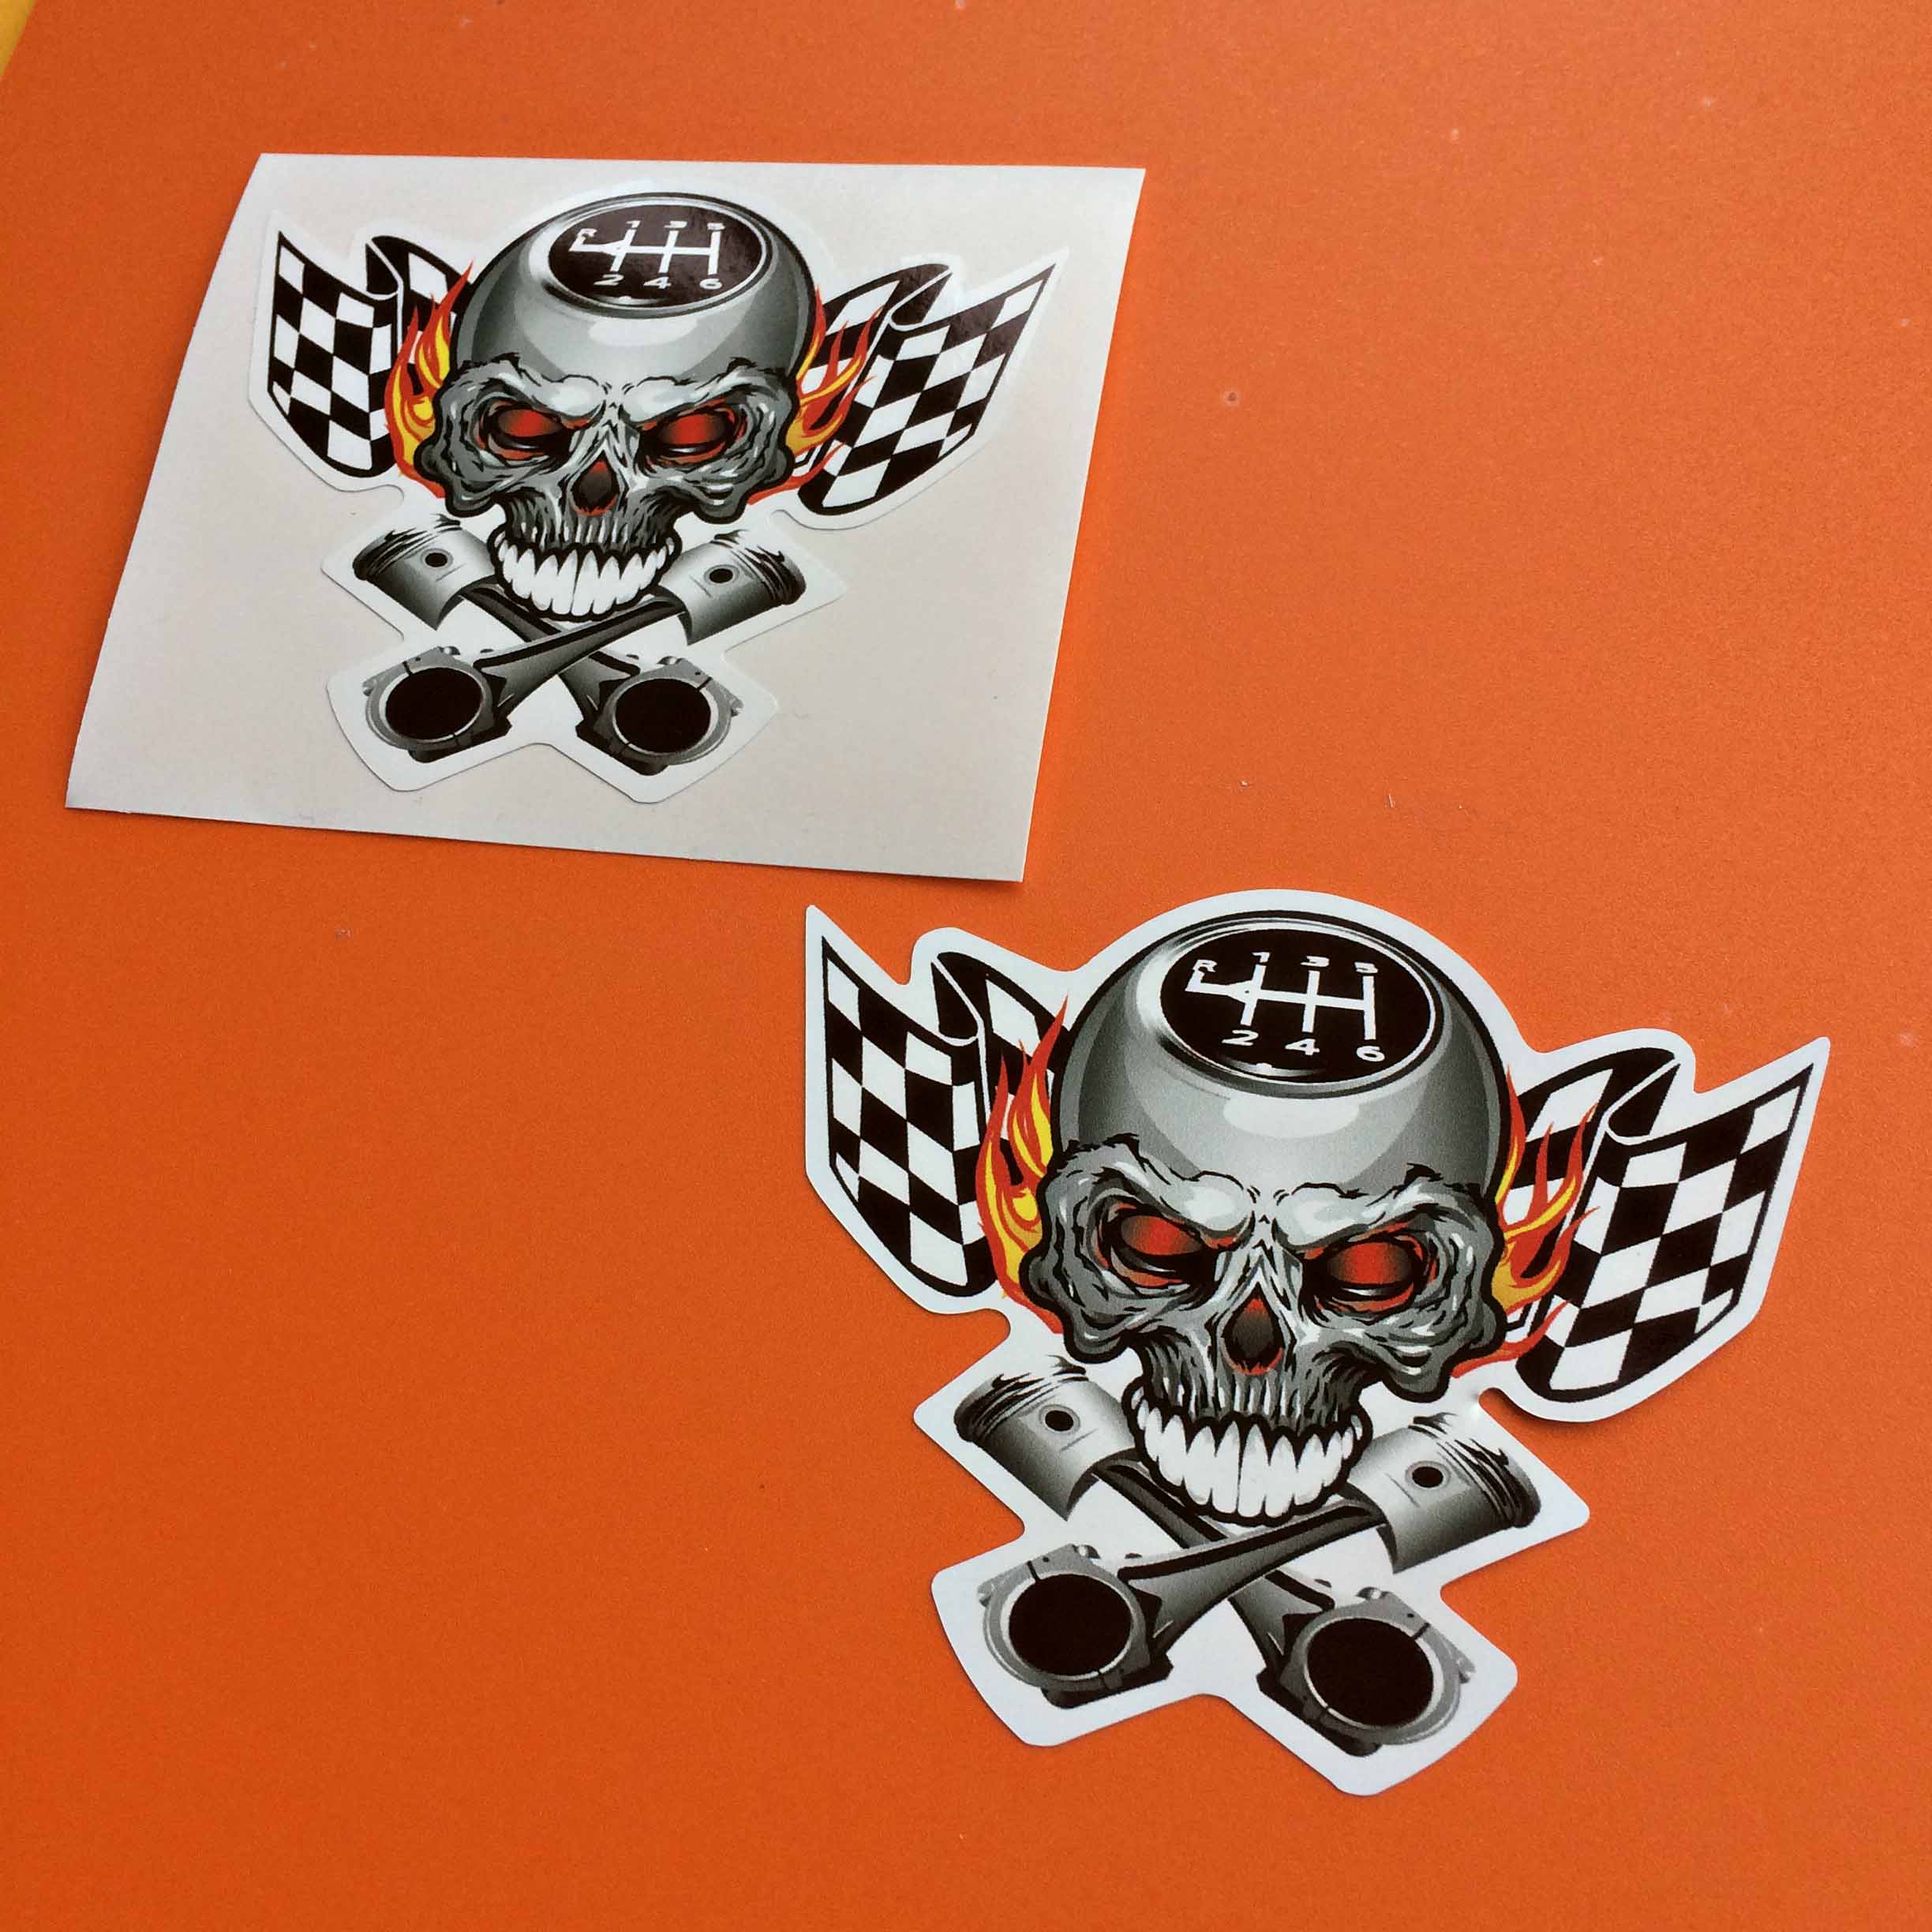 CHEQUERED SKULL AND PISTONS STICKERS. Two crossed pistons below a silver skull with red eyes and white teeth. On the scalp of the skull are the symbols R 1 2 3 4 5 6 as on a car gearstick. A chequered flag and flames are in the background.